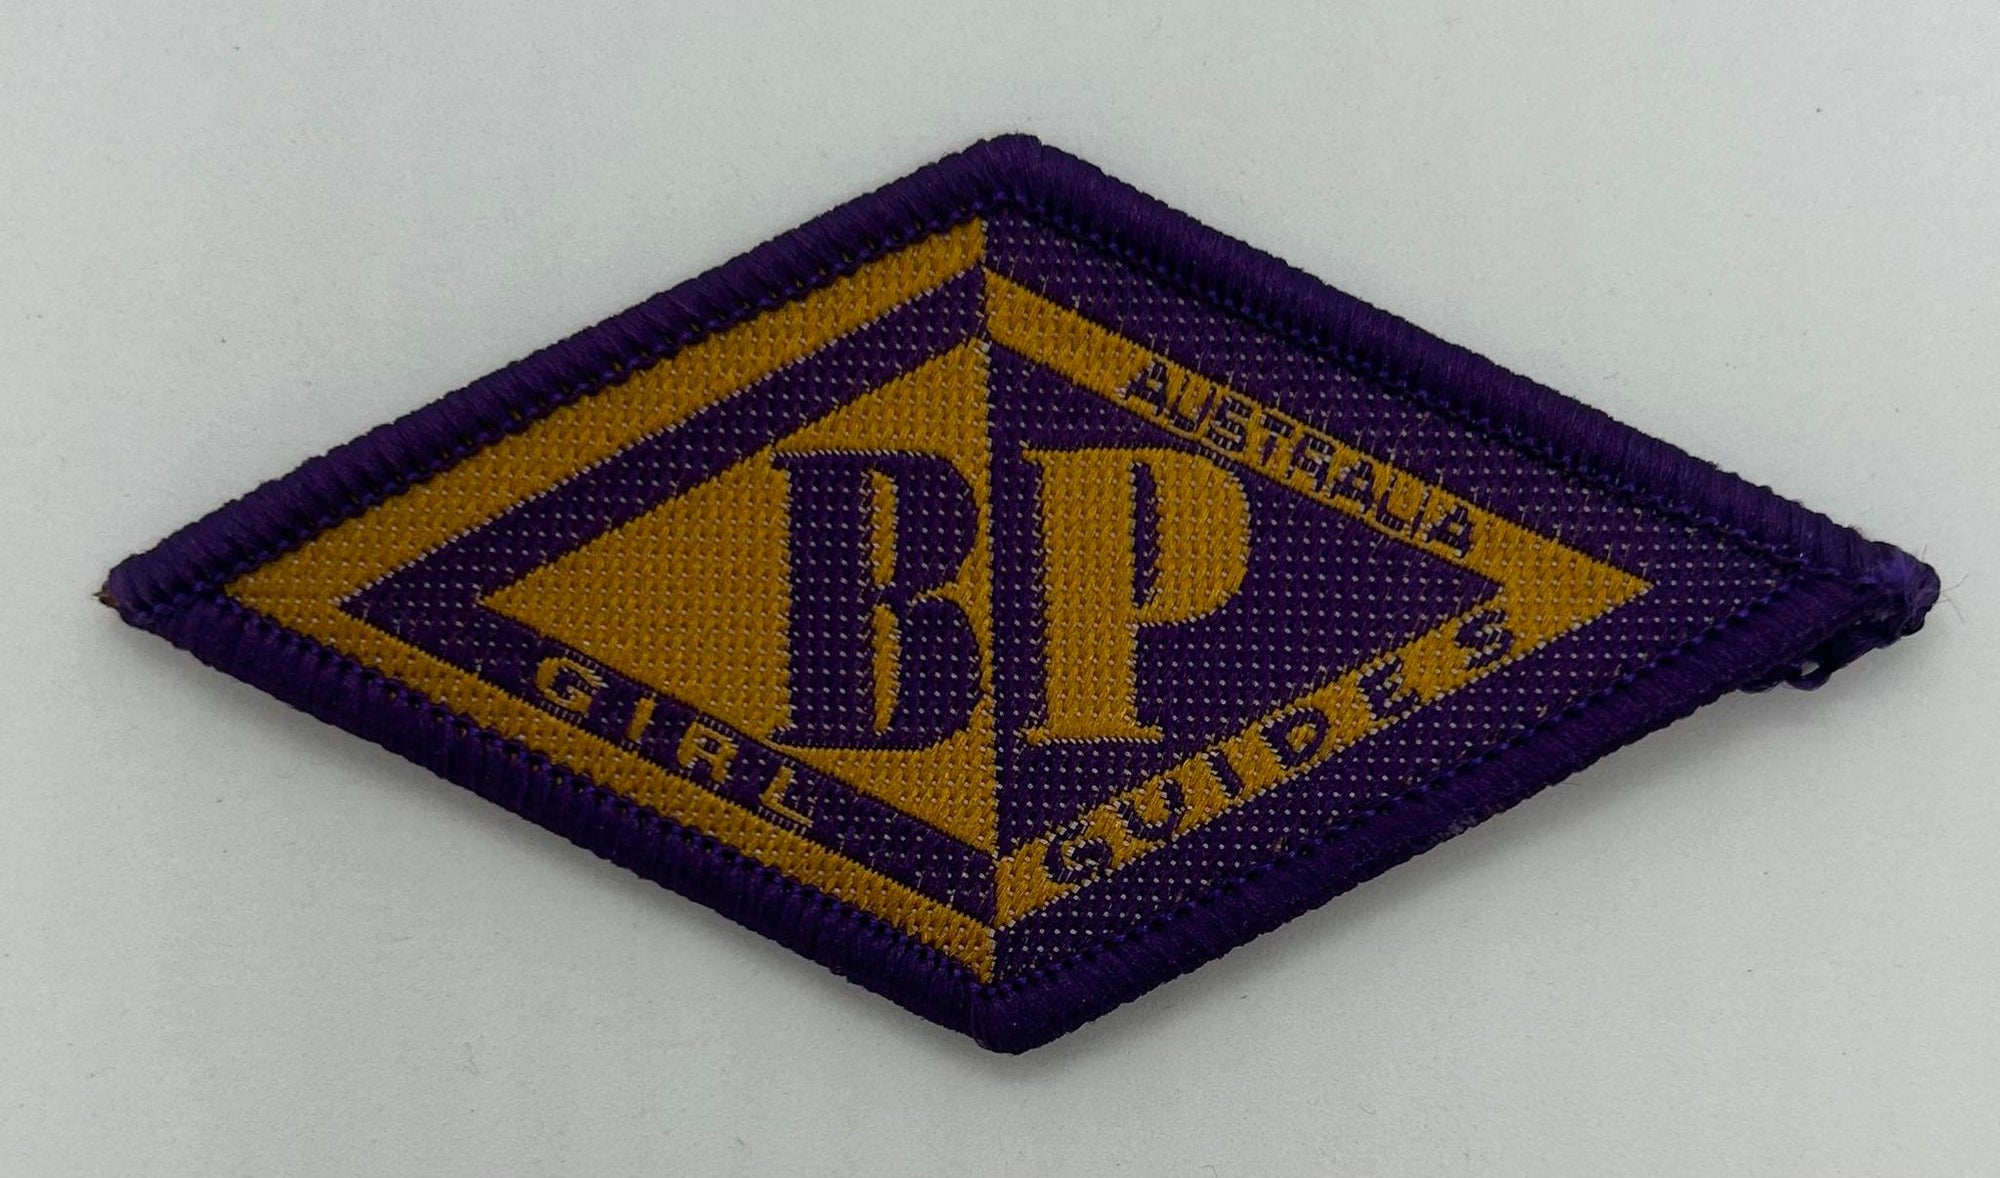 a diamond shaped badge with the BP logo on it